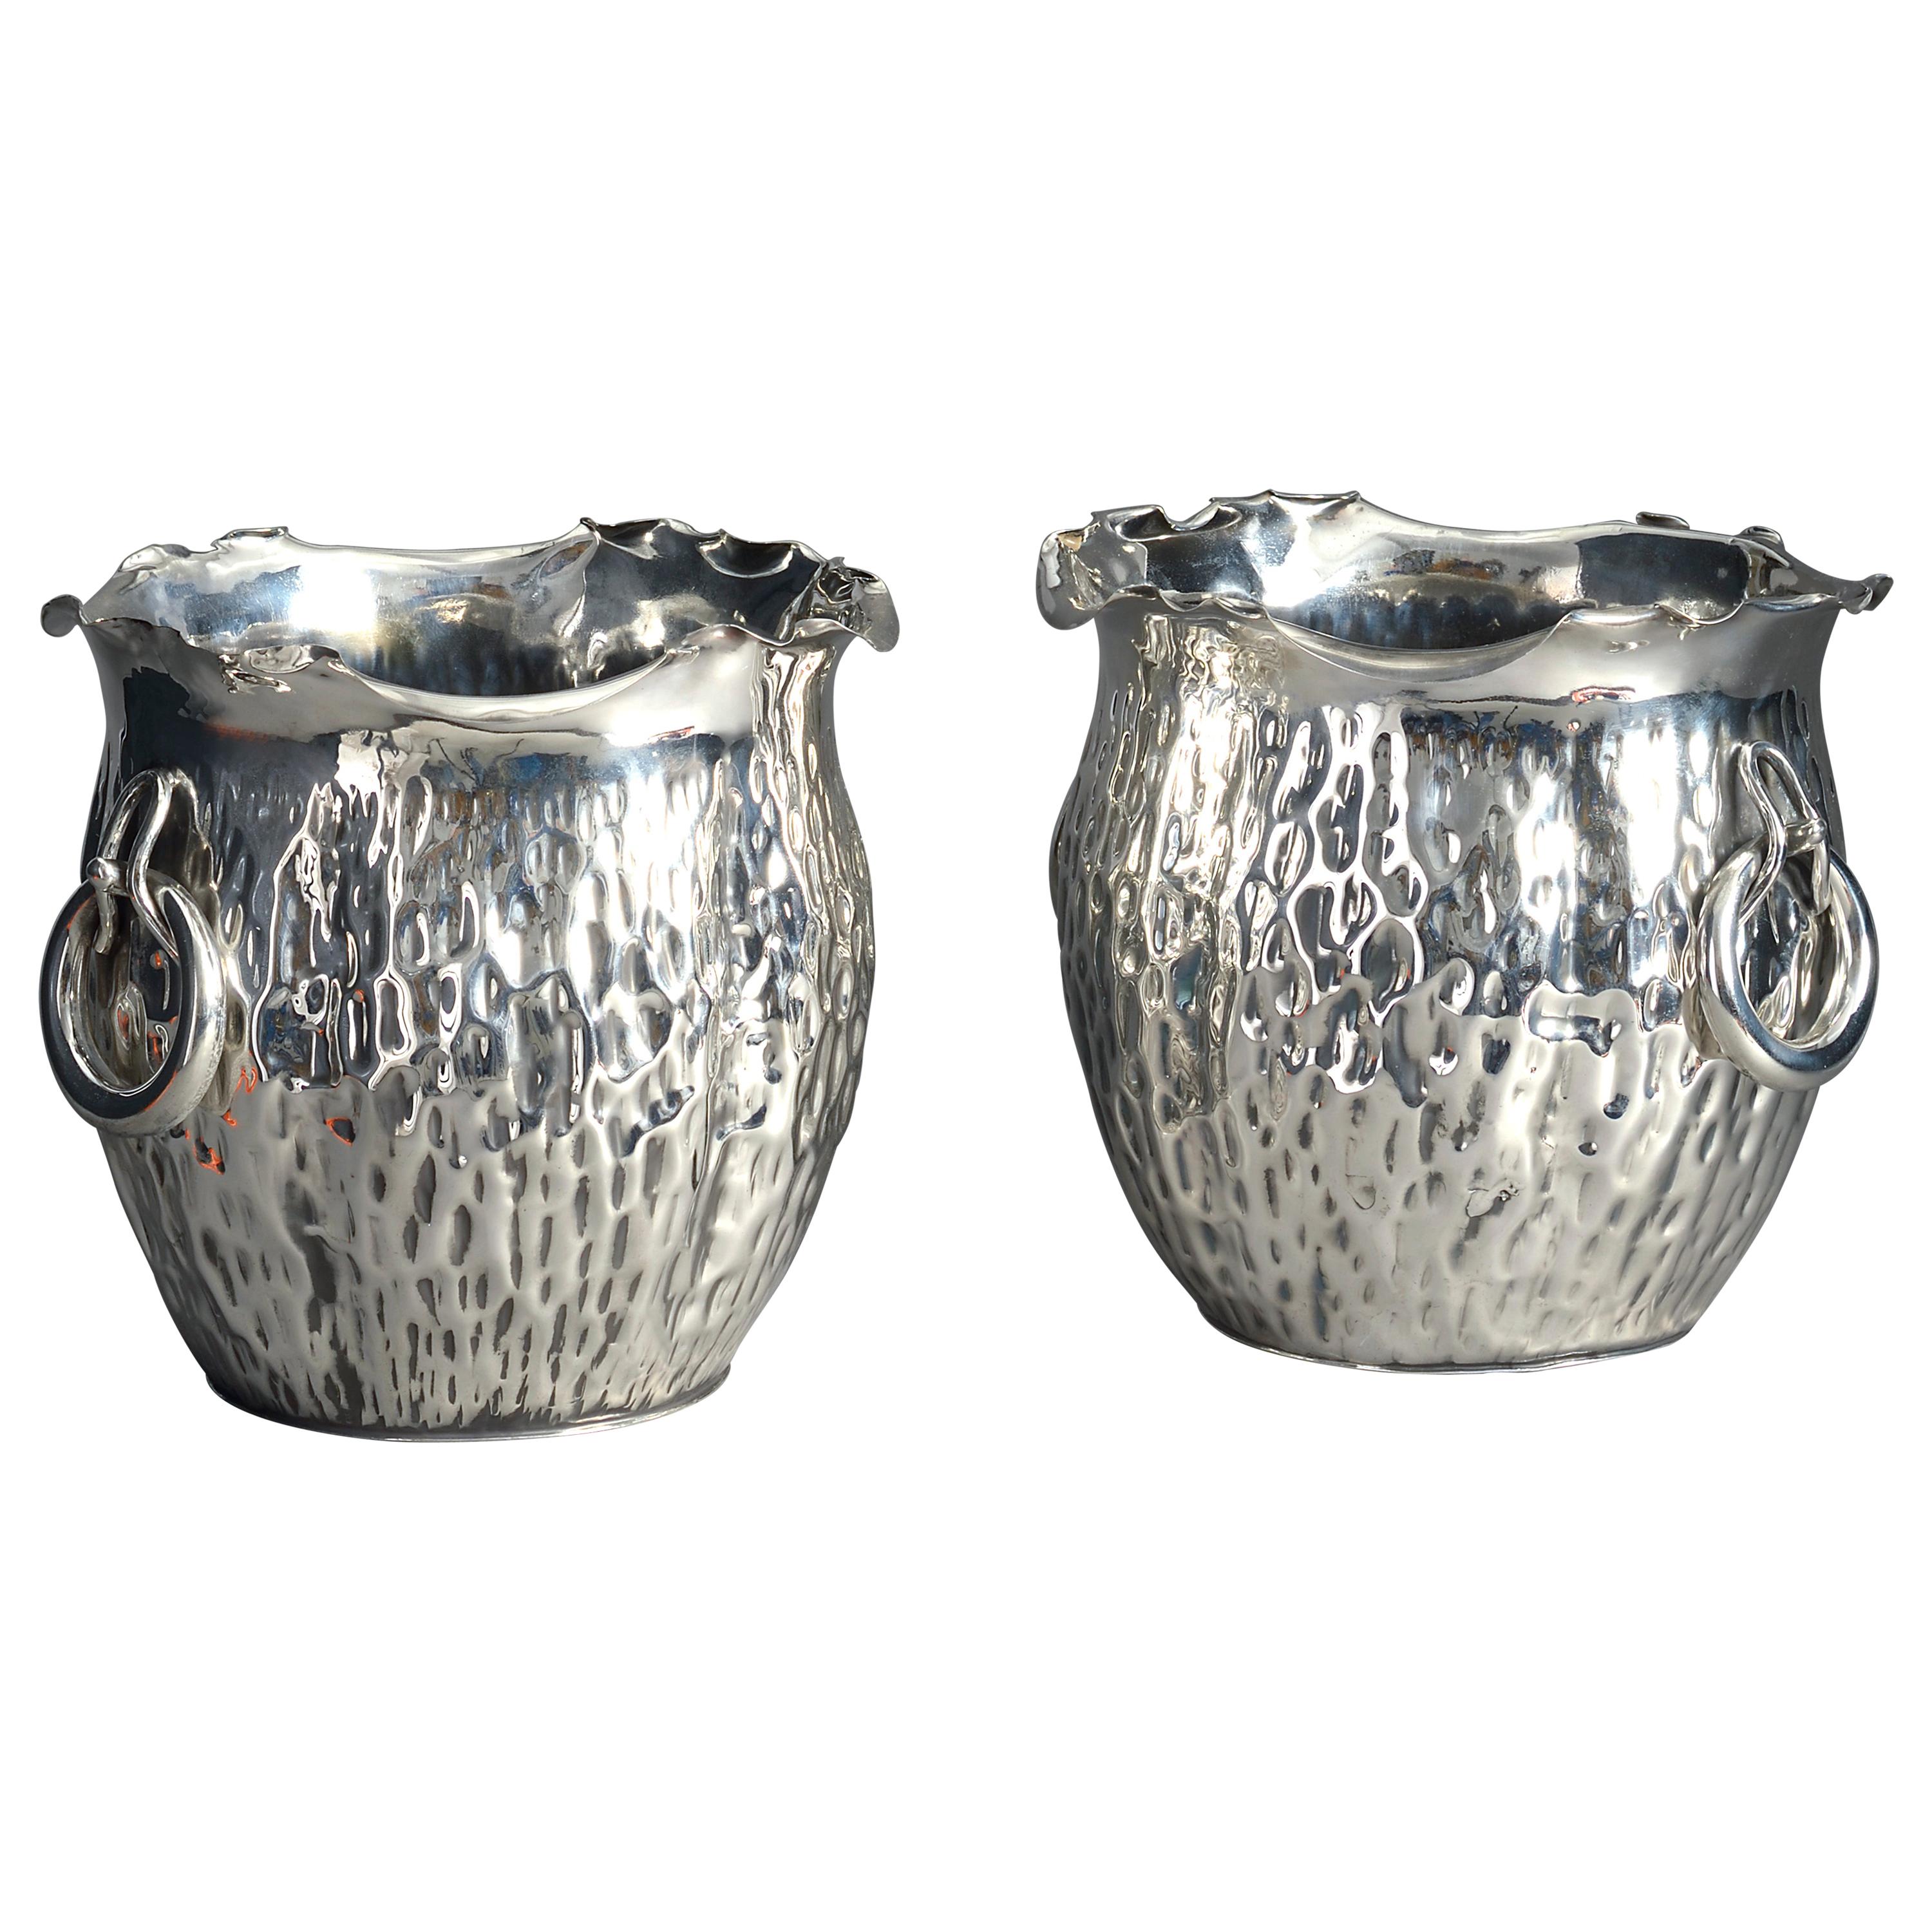 Pair of 19th Century Silver Planters or Coolers by Hukin & Heath